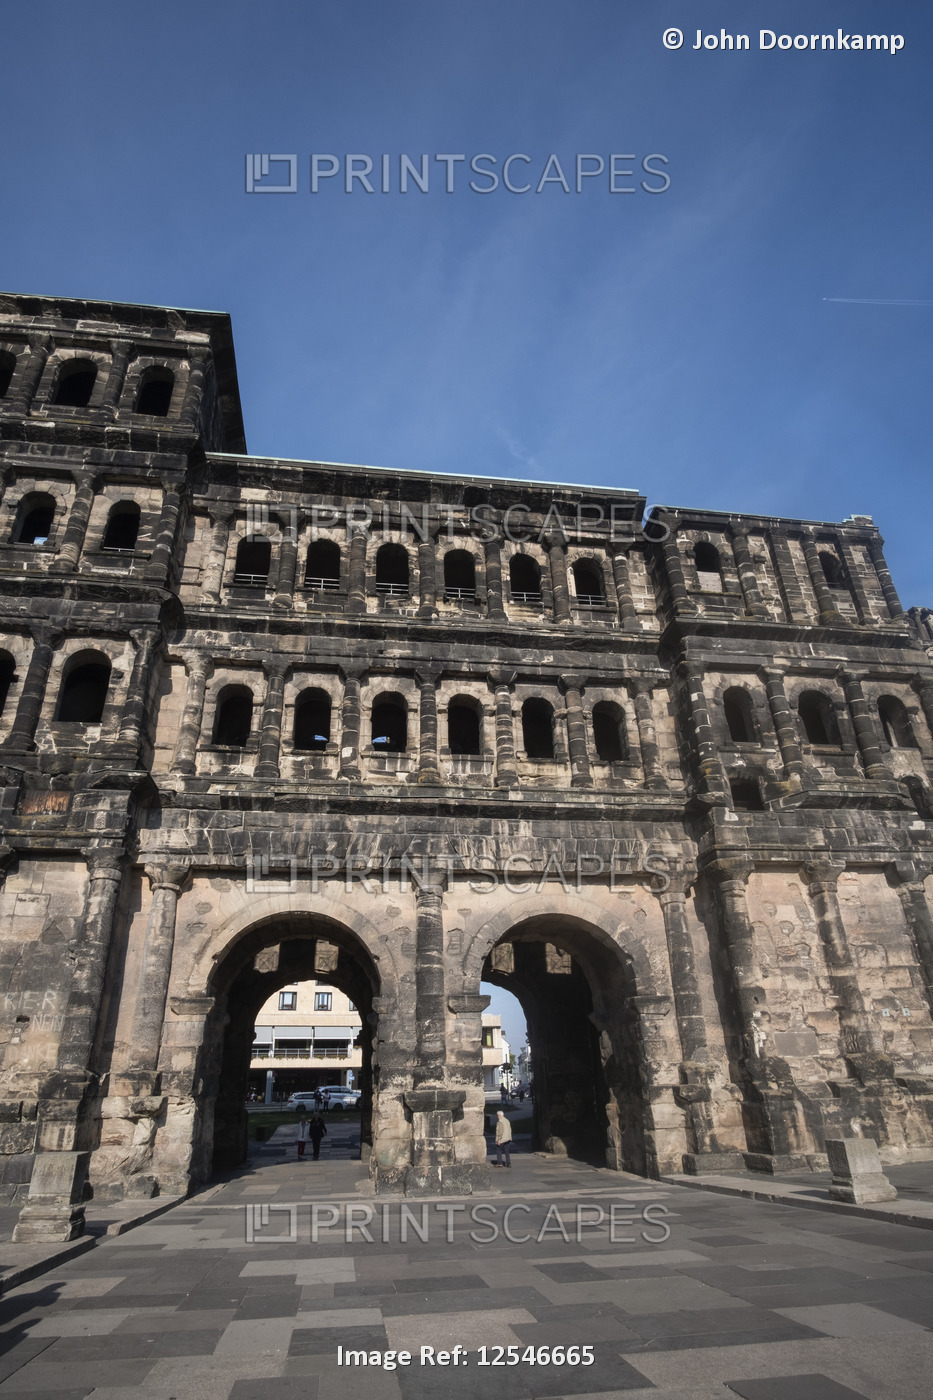 TRIER MOSEL VALLEY PORTA NIGRA VIEWED FROM THE INNER SIDE